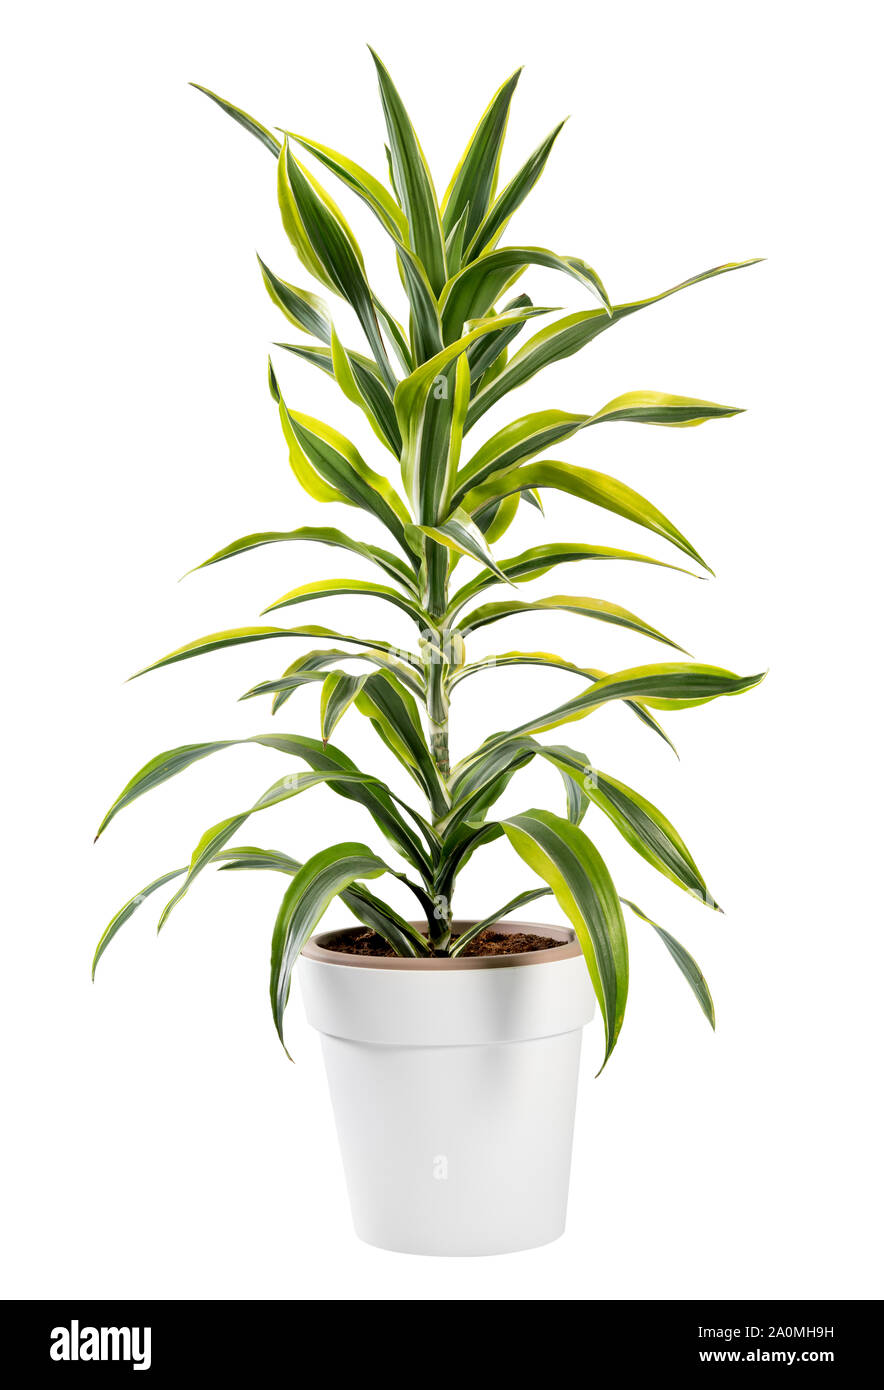 Isolated Dracaena potted plant in generic white pot, a popular houseplant with its ornamental variegated leaves Stock Photo